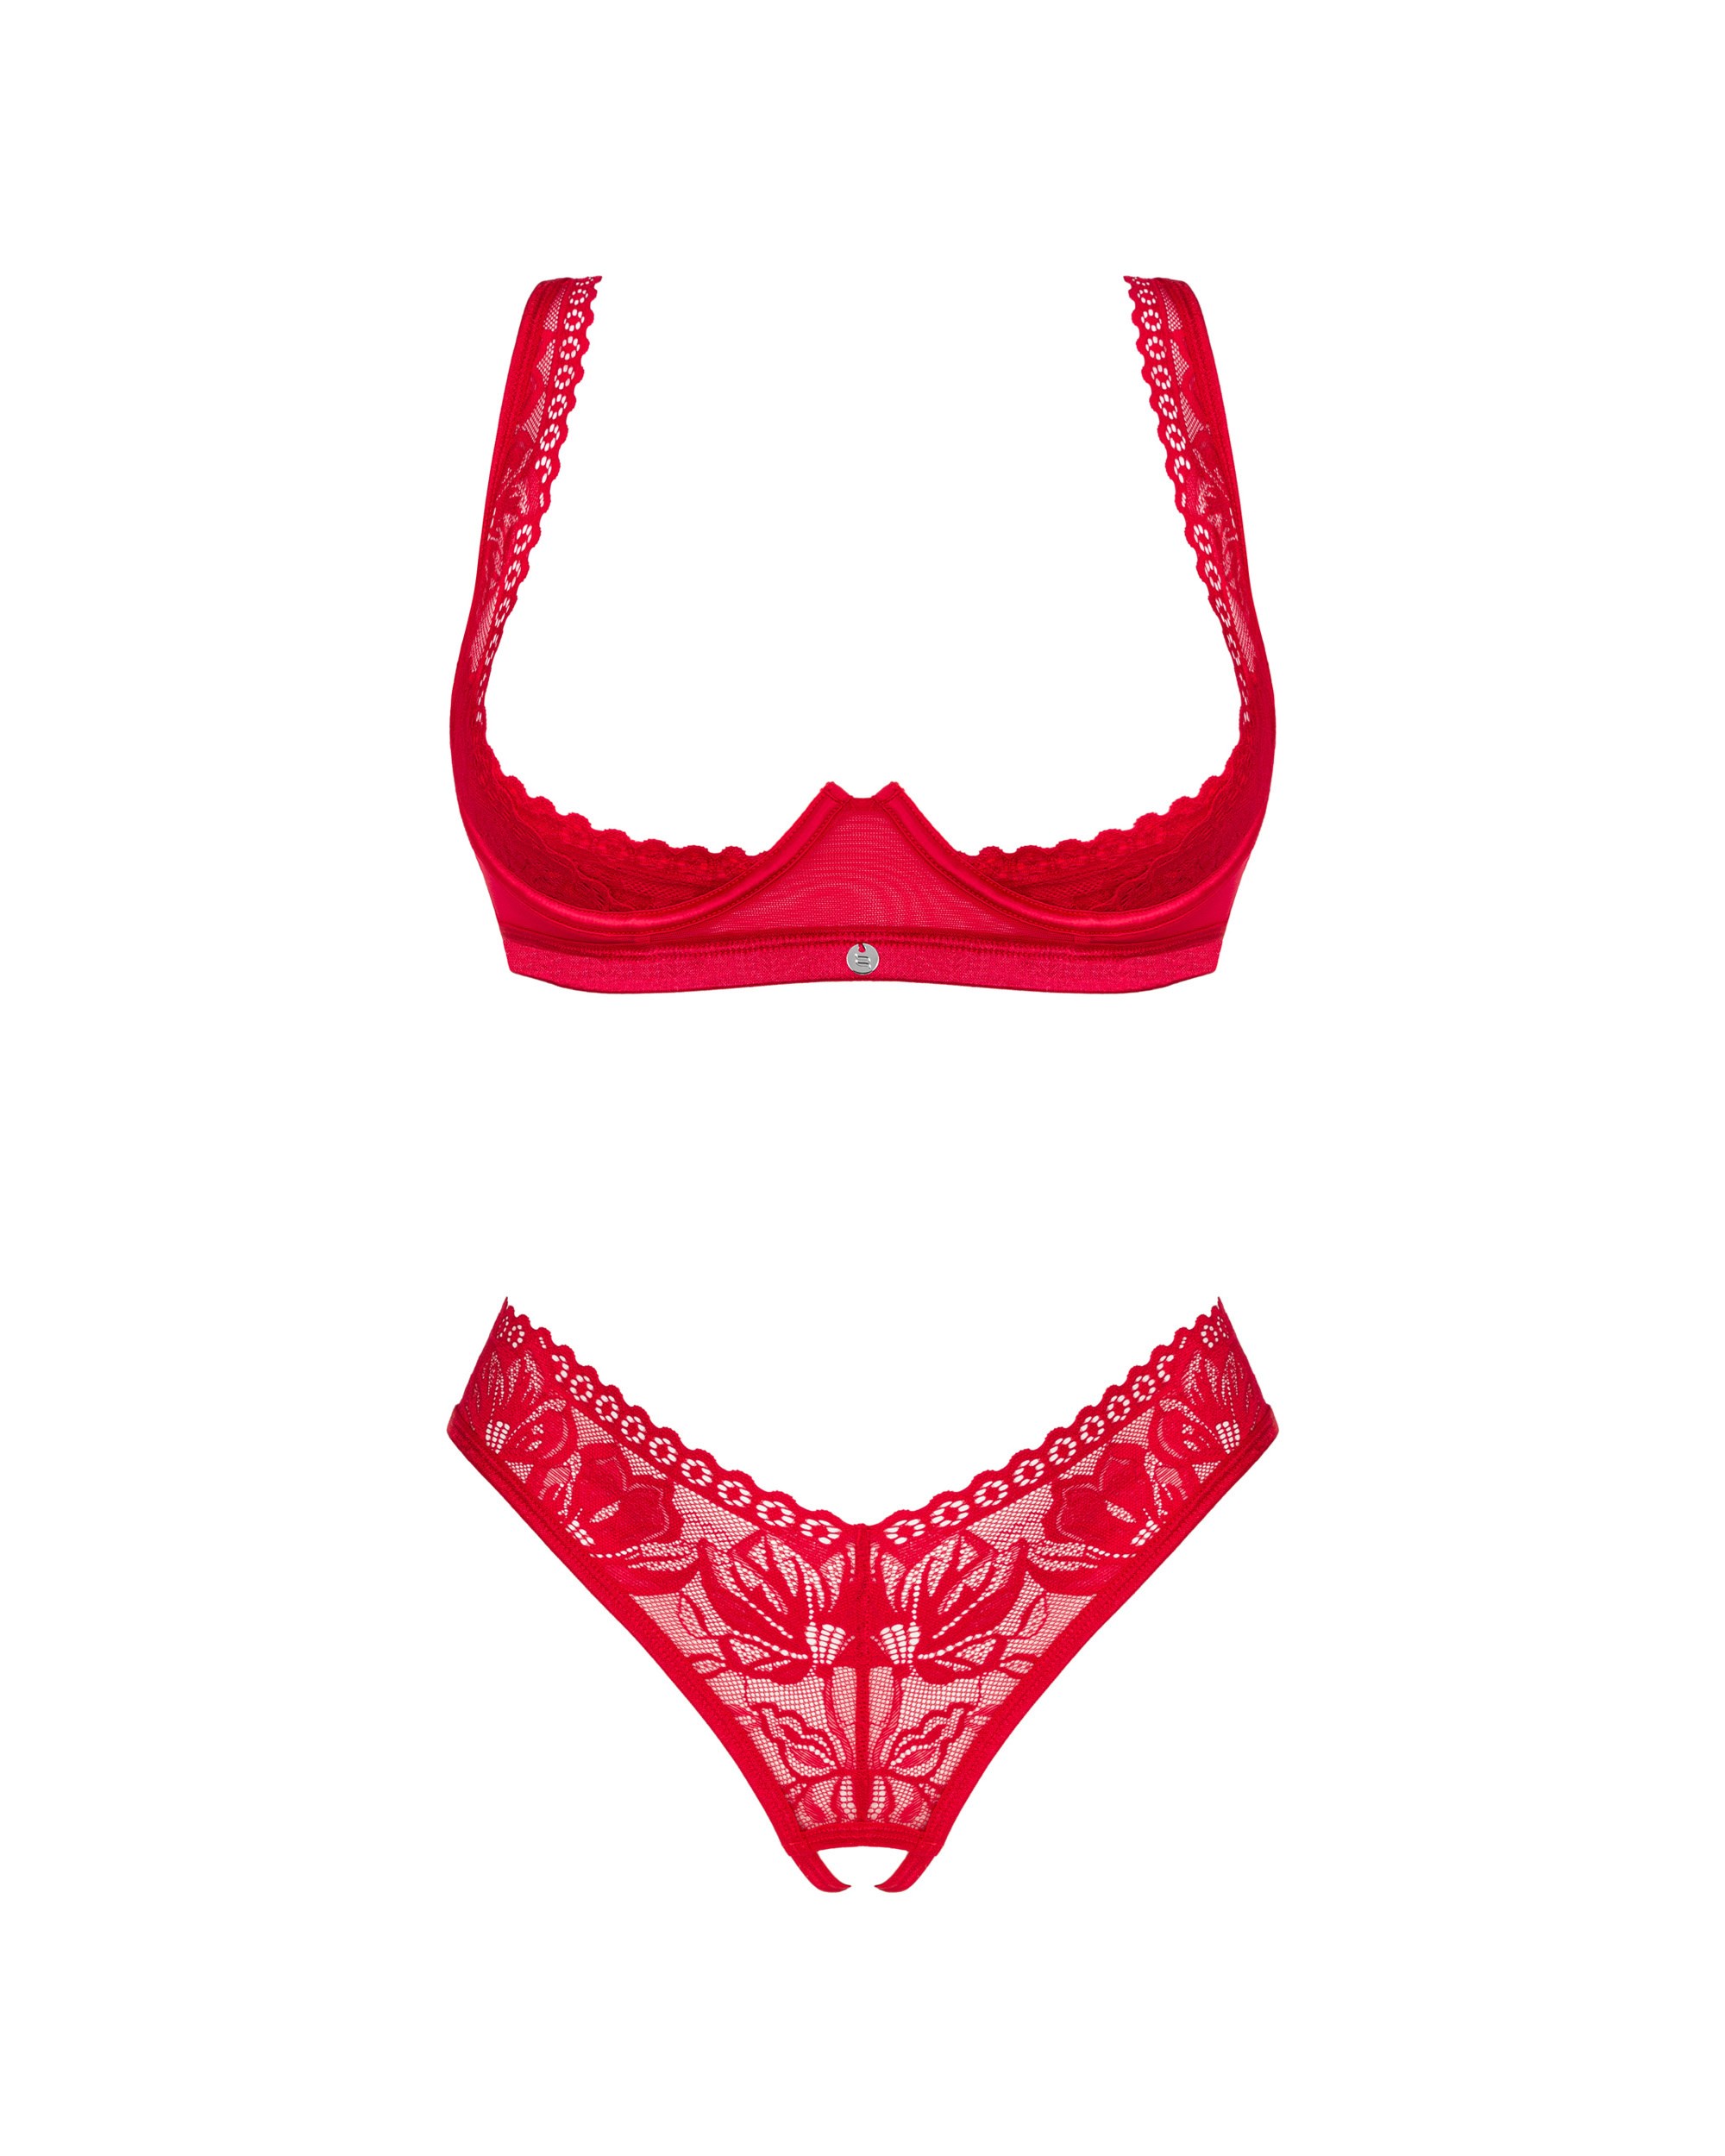 Lacelove Cupless 2-pcs Set Red